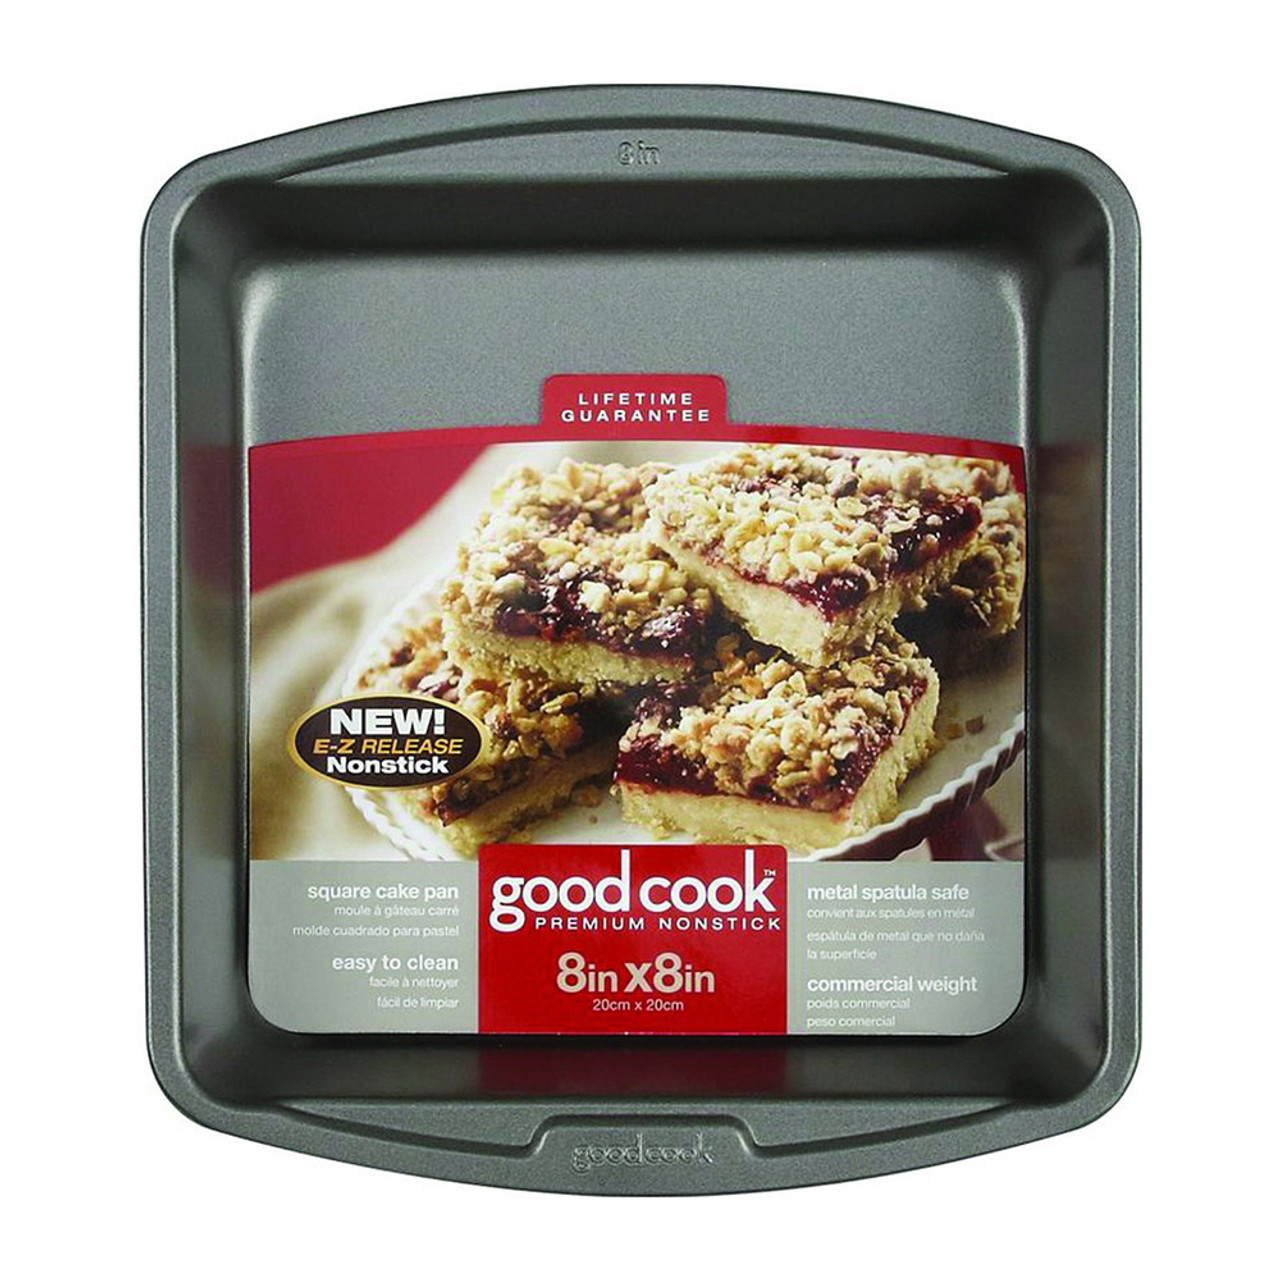 GoodCook Bread Pan, Nonstick, Extra Large - 1 ea